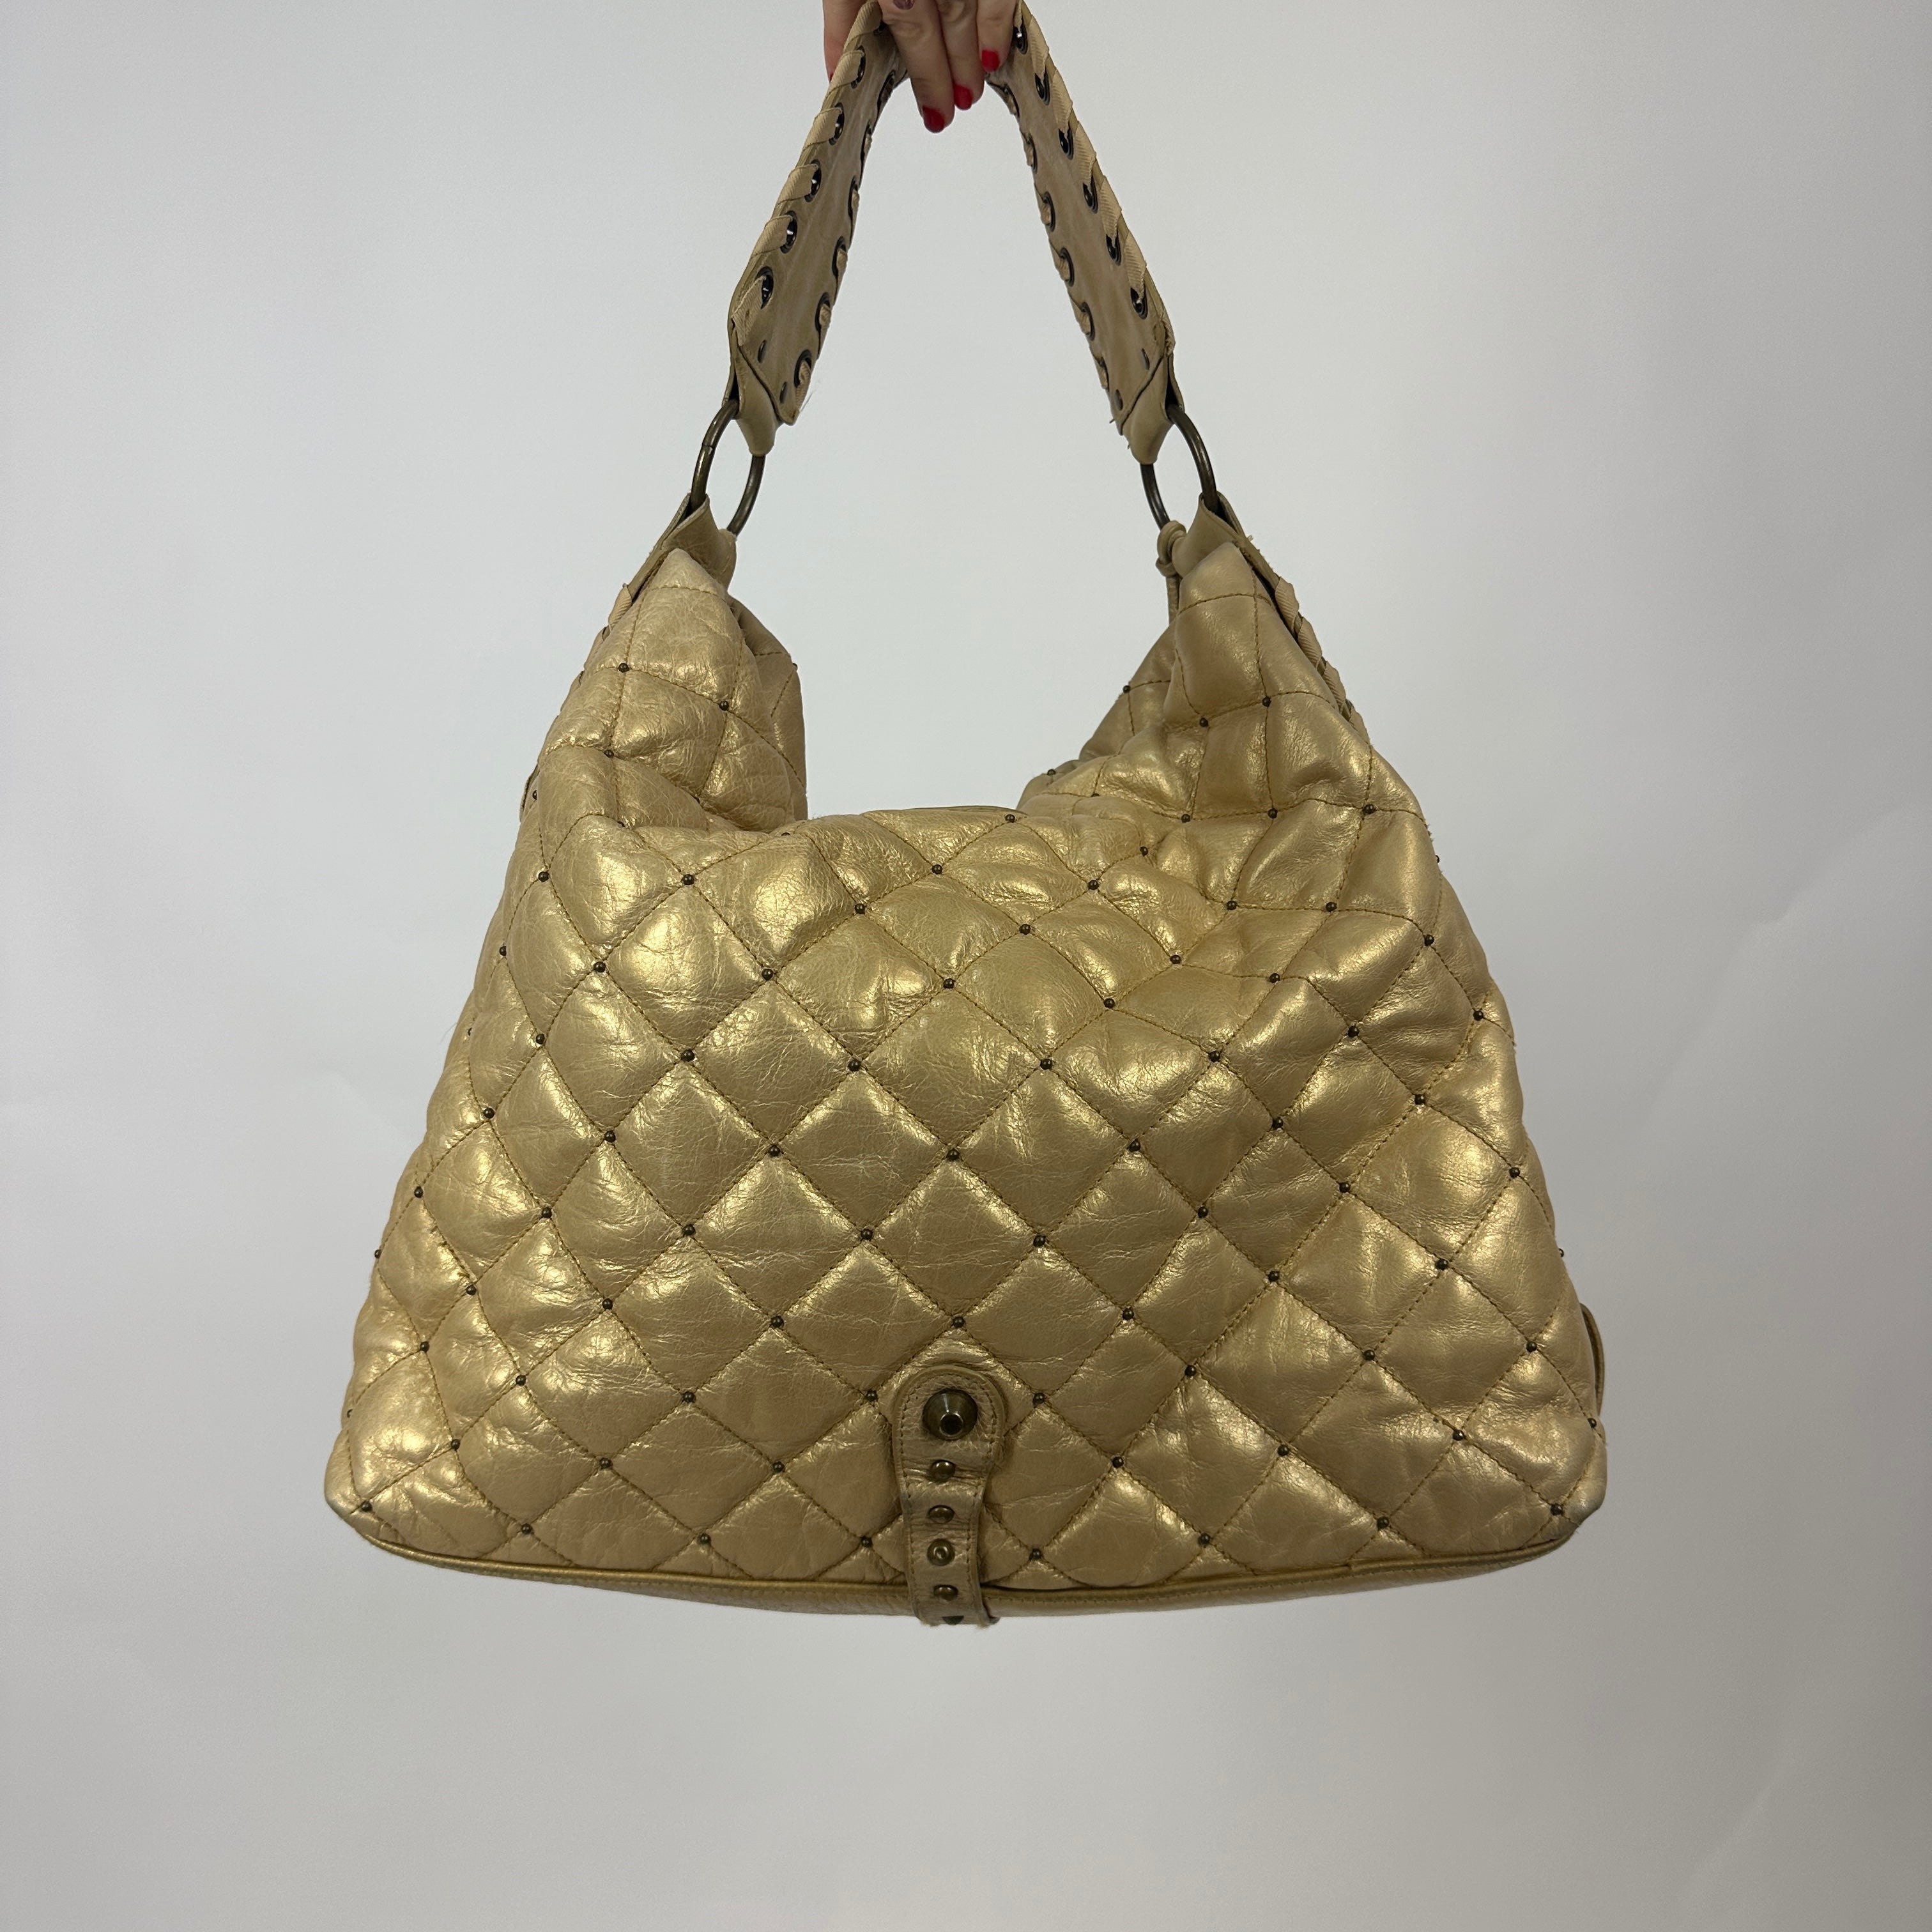 2000s Betsey Johnson Gold Leather Bag